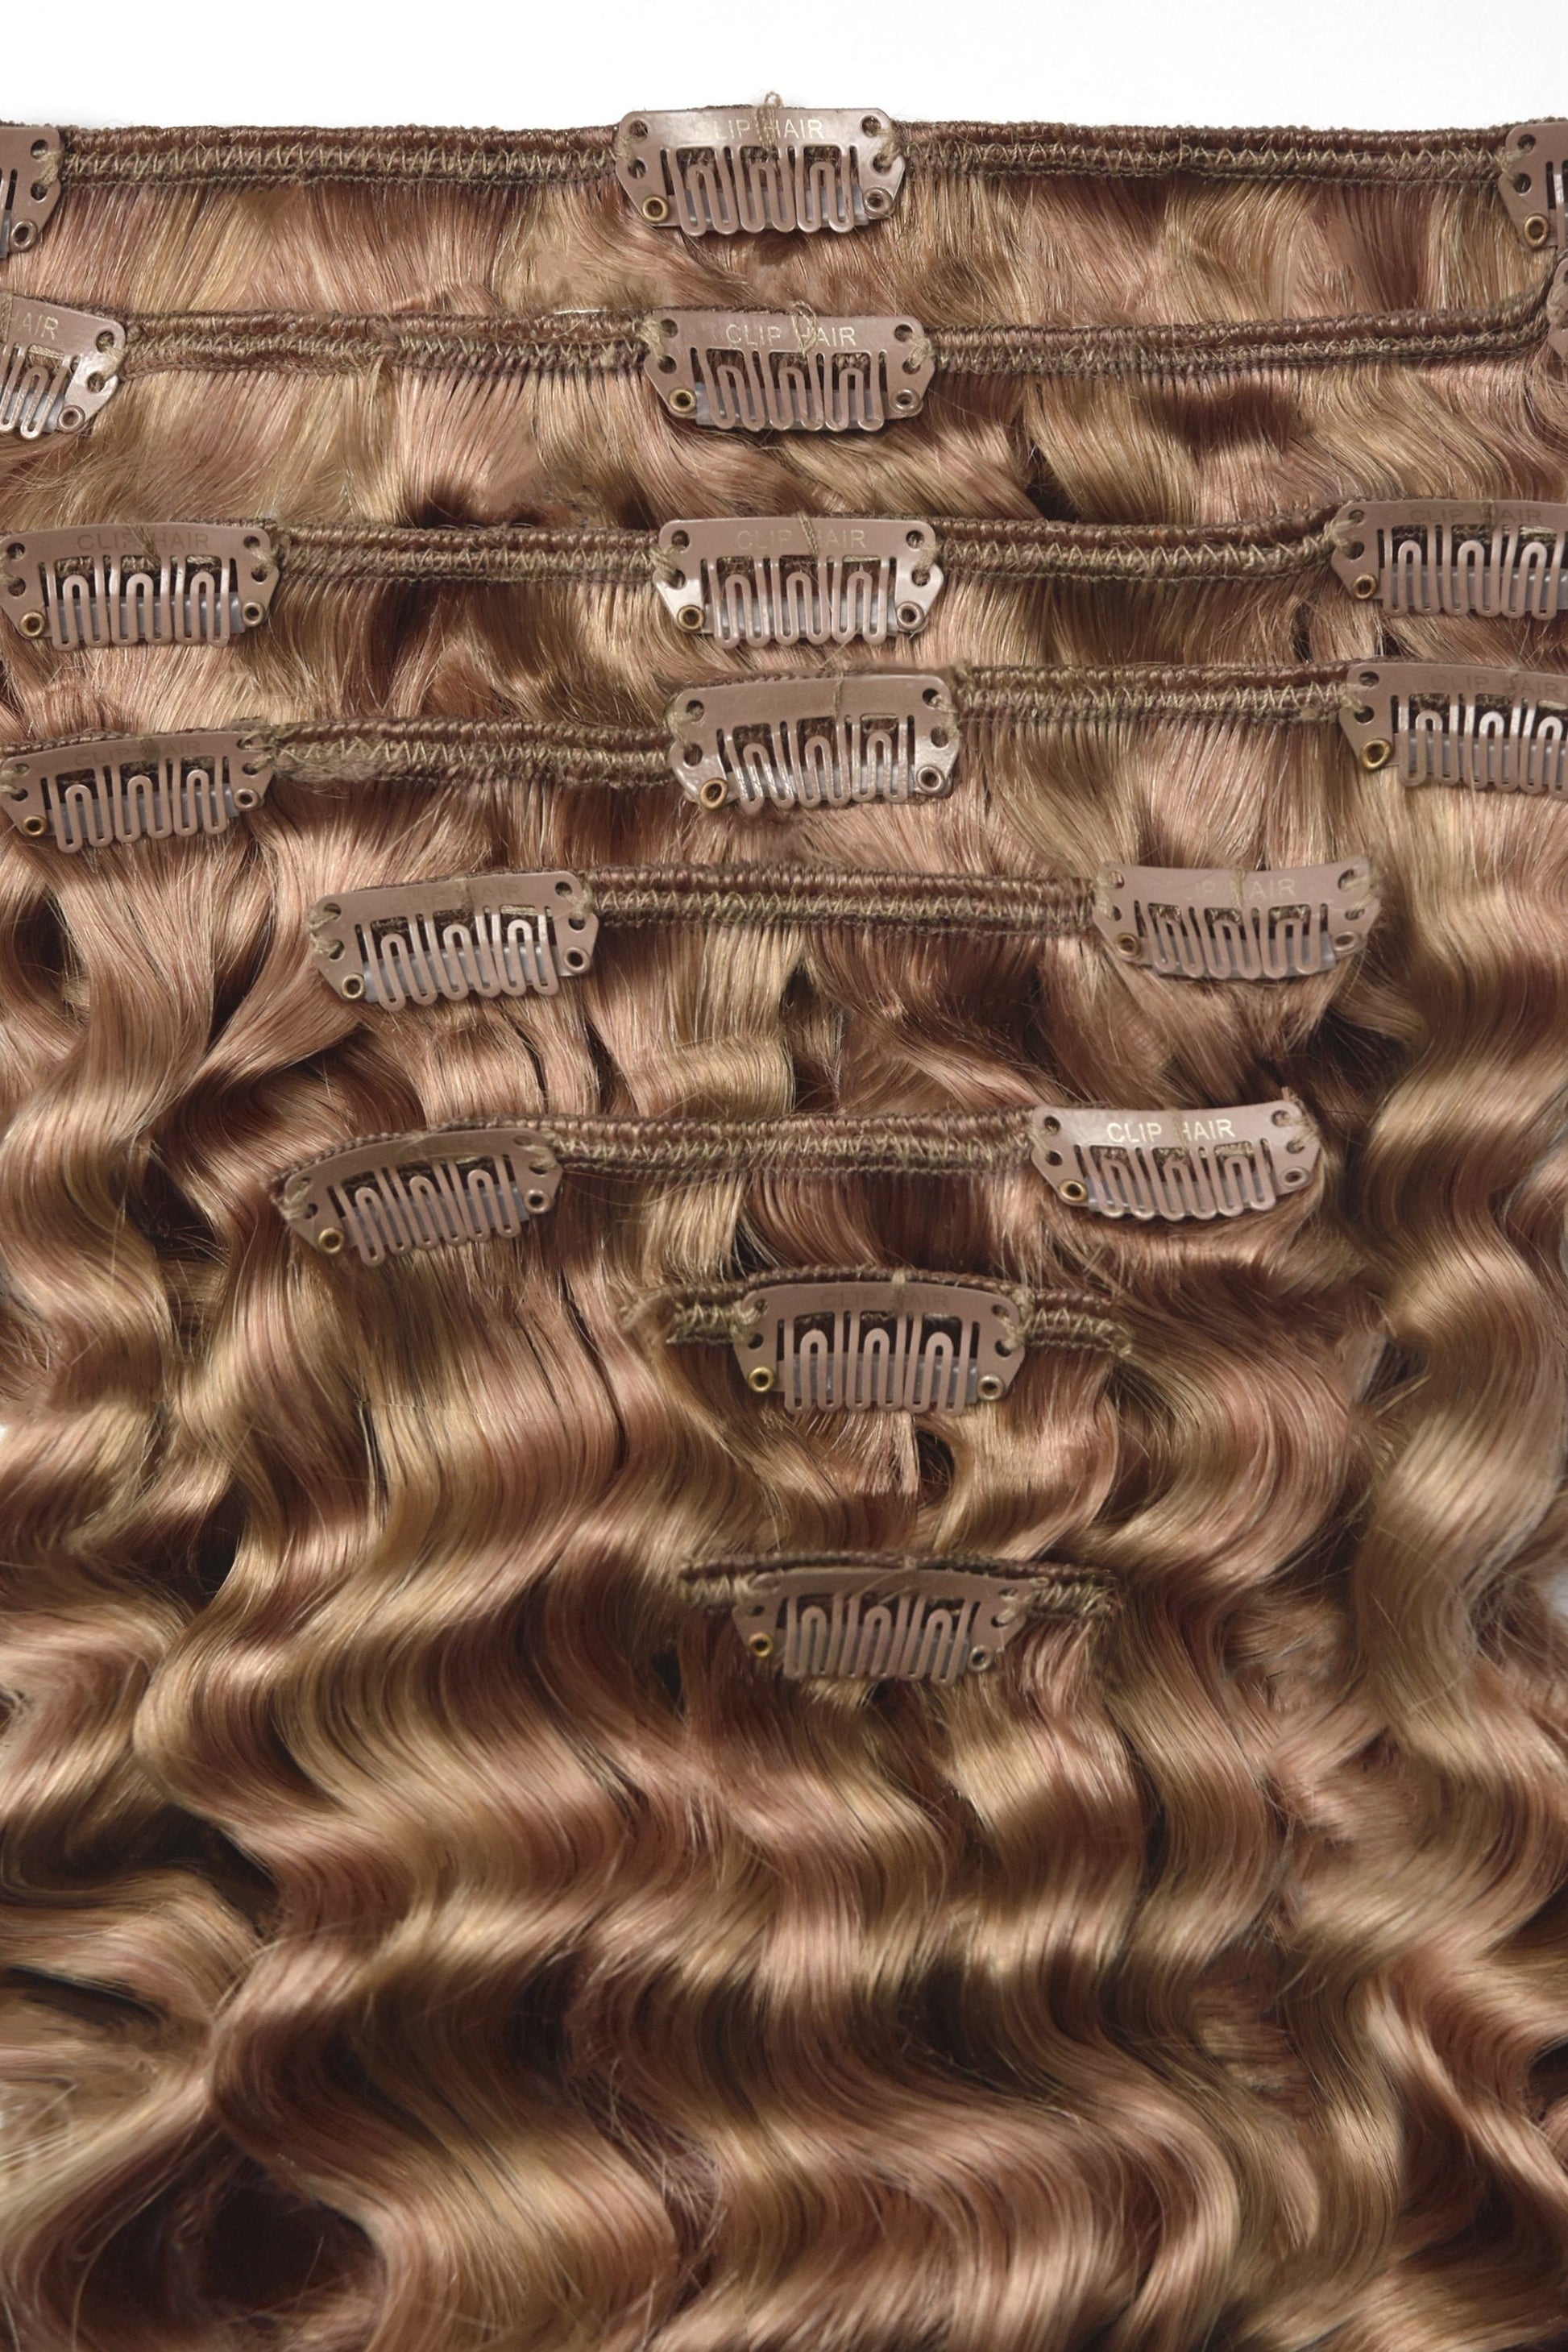 Curly Full Head Remy Clip in Human Hair Extensions #27/30 Curly Clip In Hair Extensions cliphair 